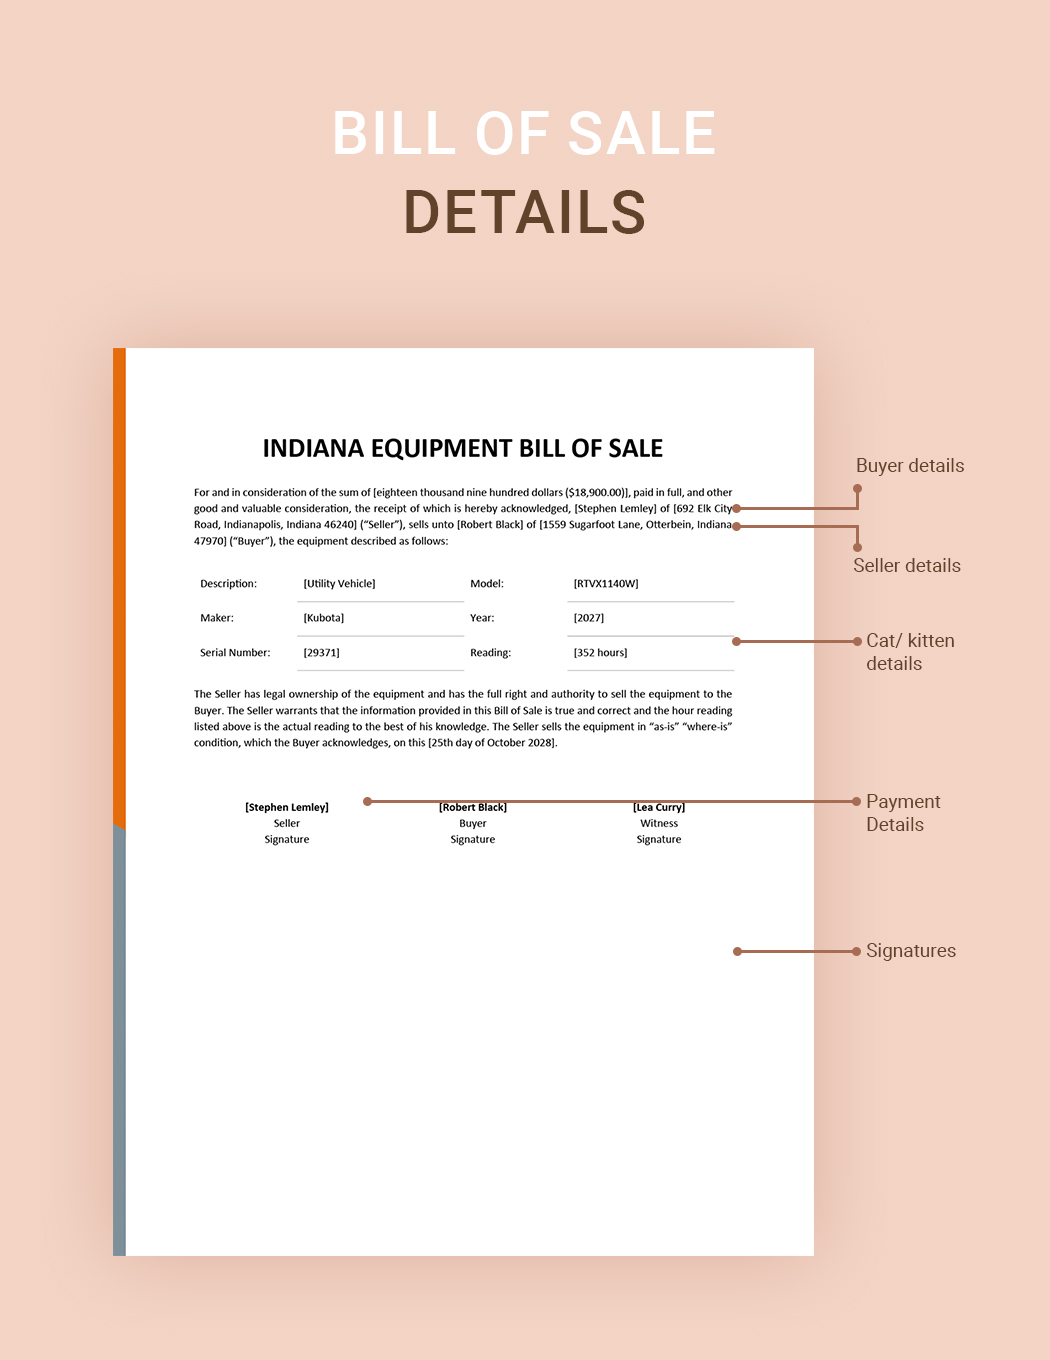 Indiana Equipment Bill of Sale Template